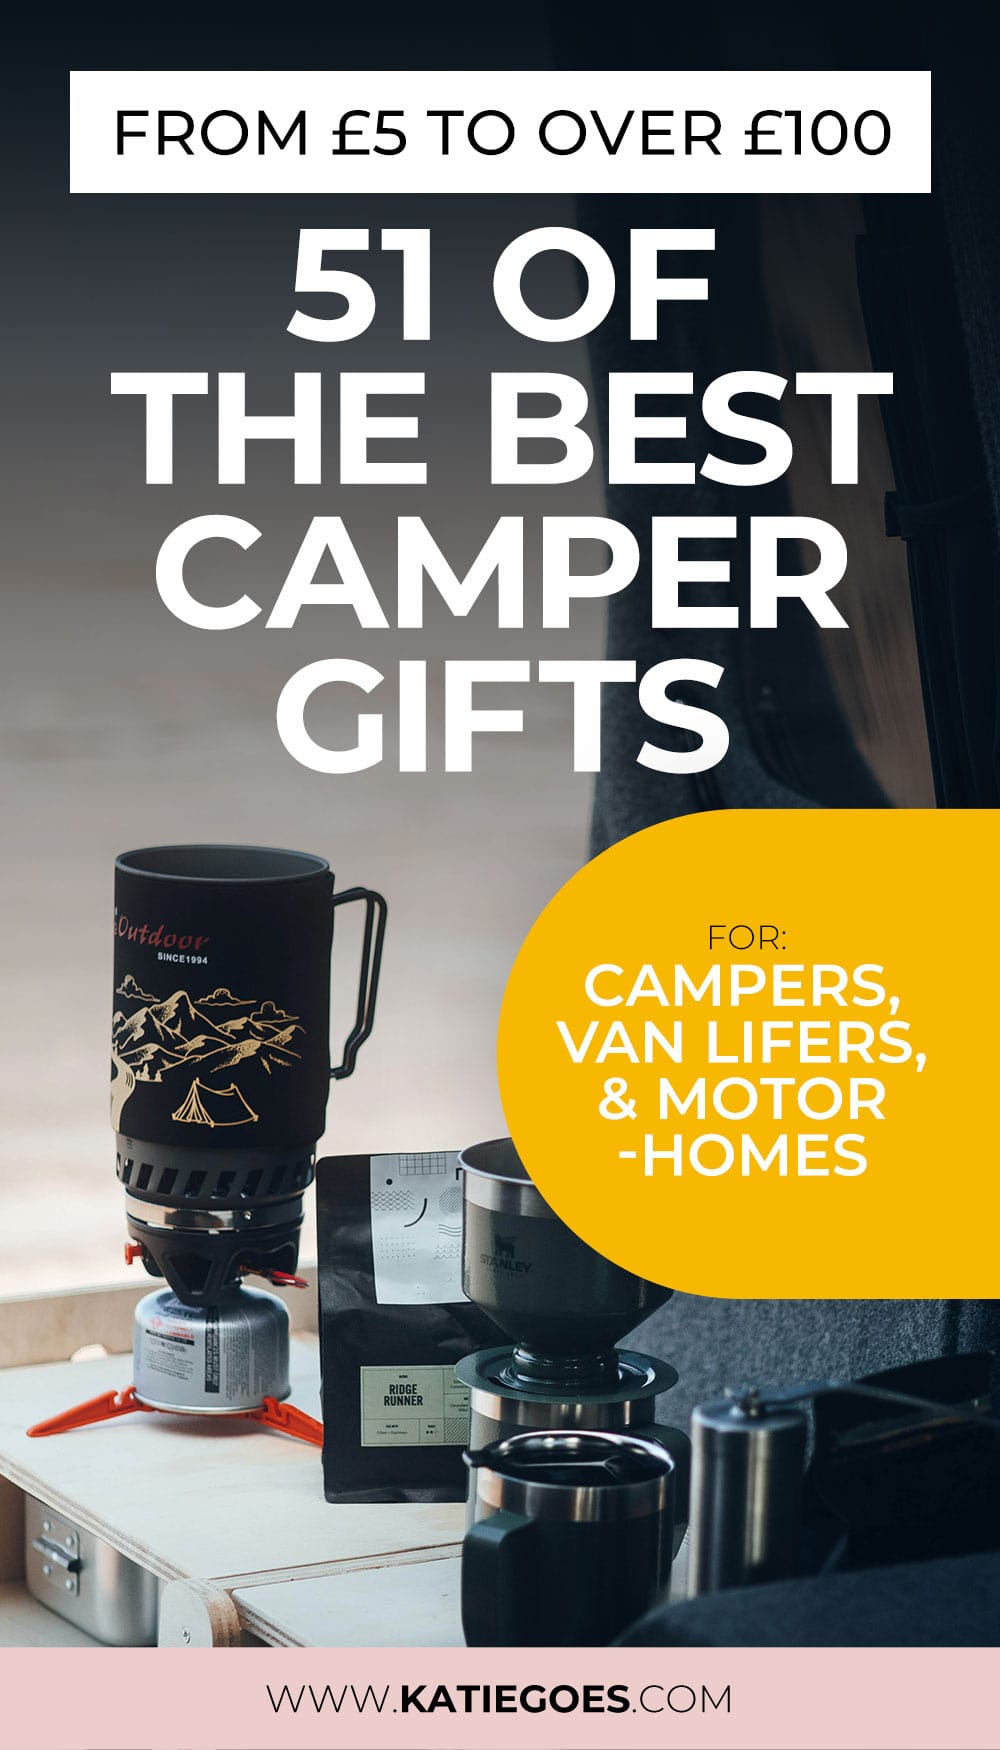 Van Life Gifts: From £5 to over £100 - 51 of the Best Camper Gifts